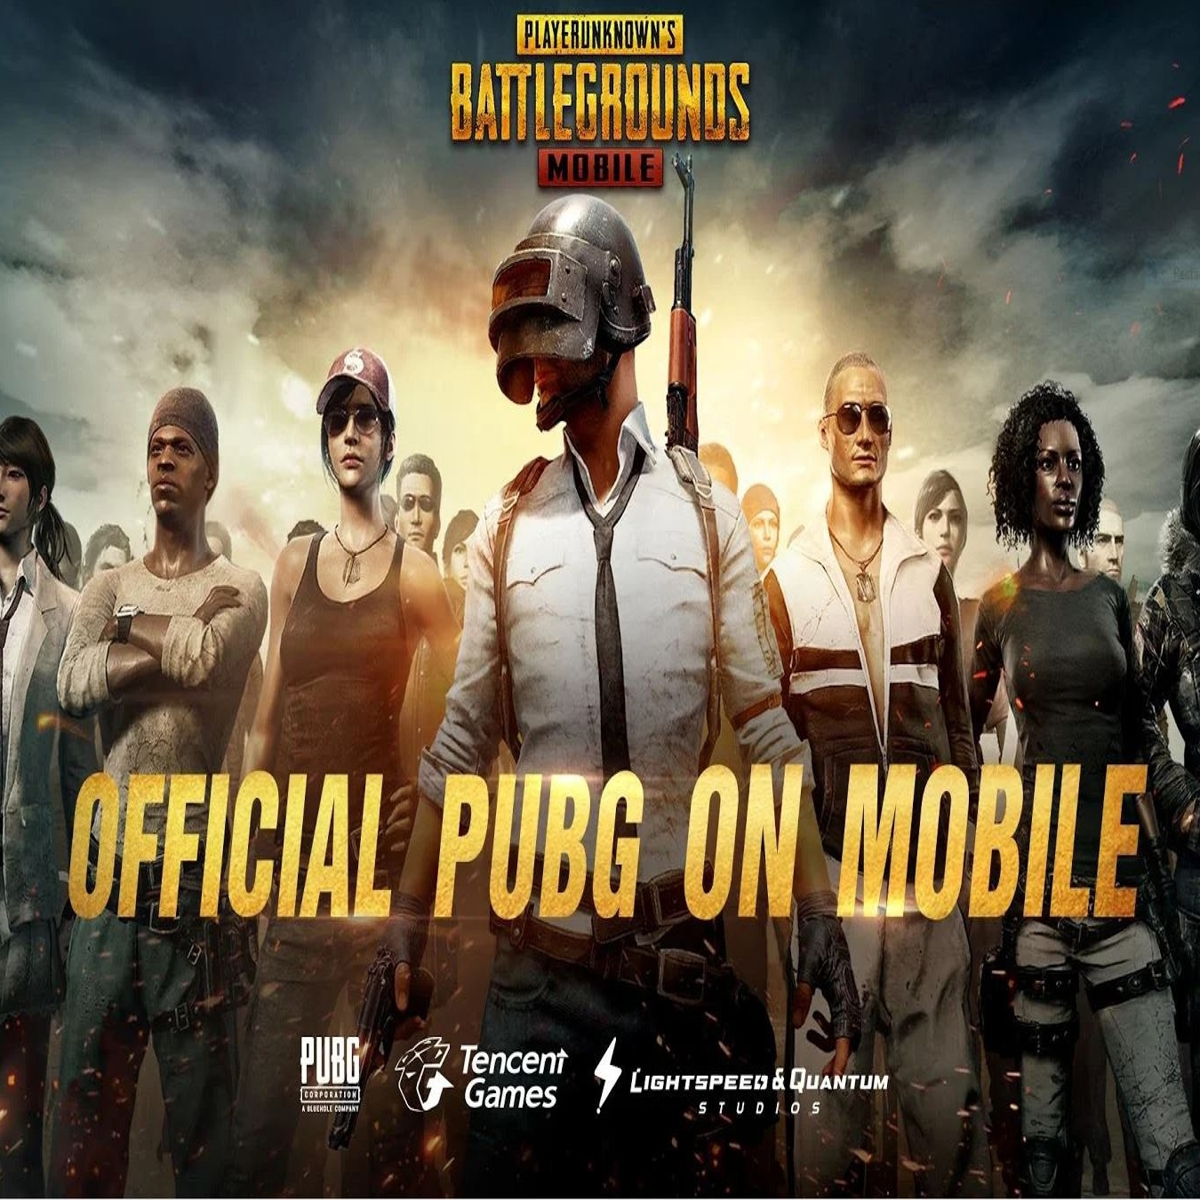 Download PUBG MOBILE and play PUBG MOBILE Online 